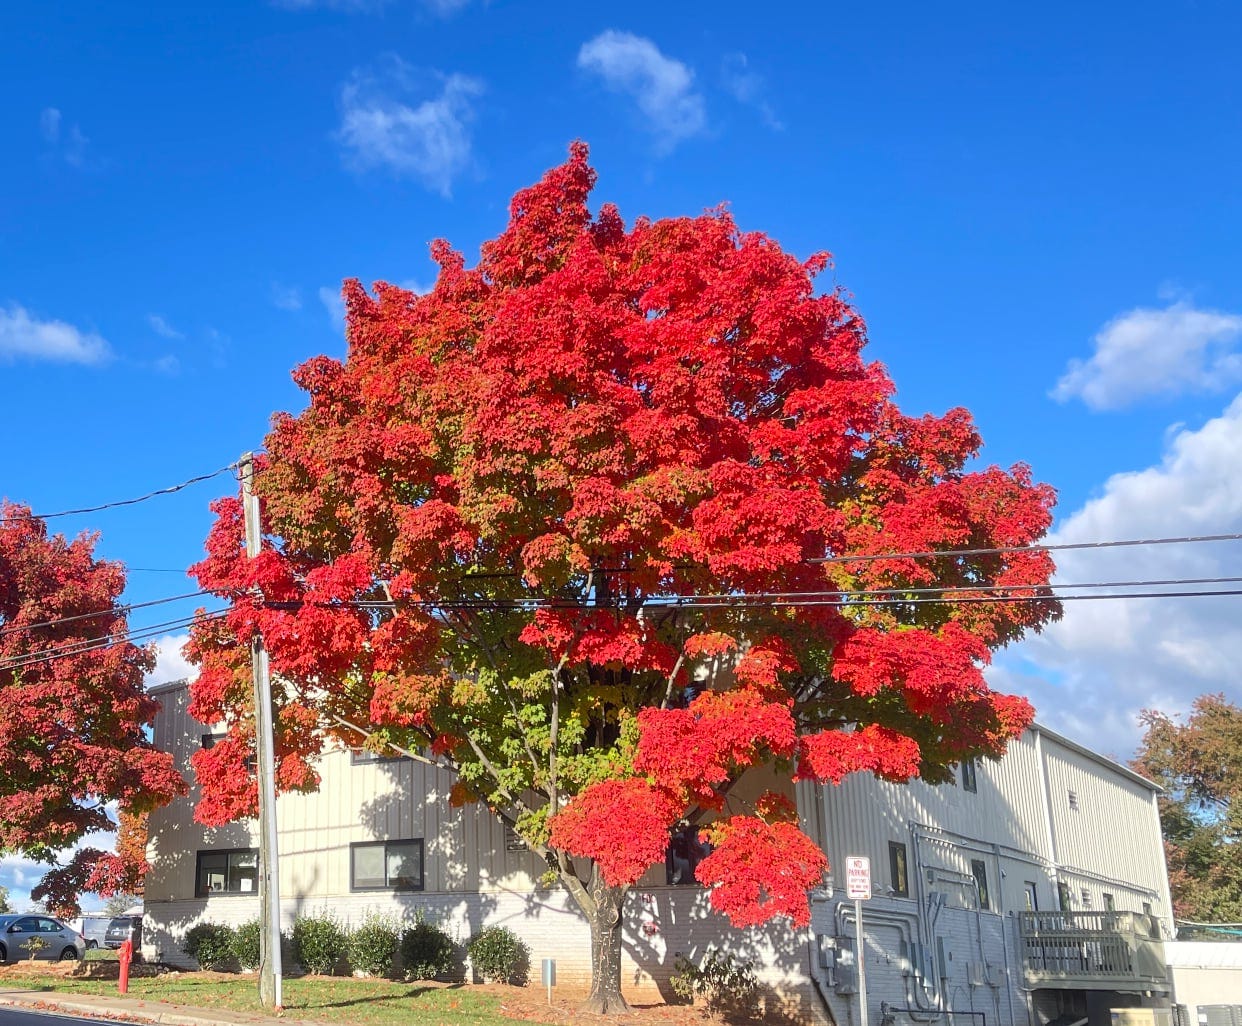 Tree with bright red leaves in front of a deep blue sky